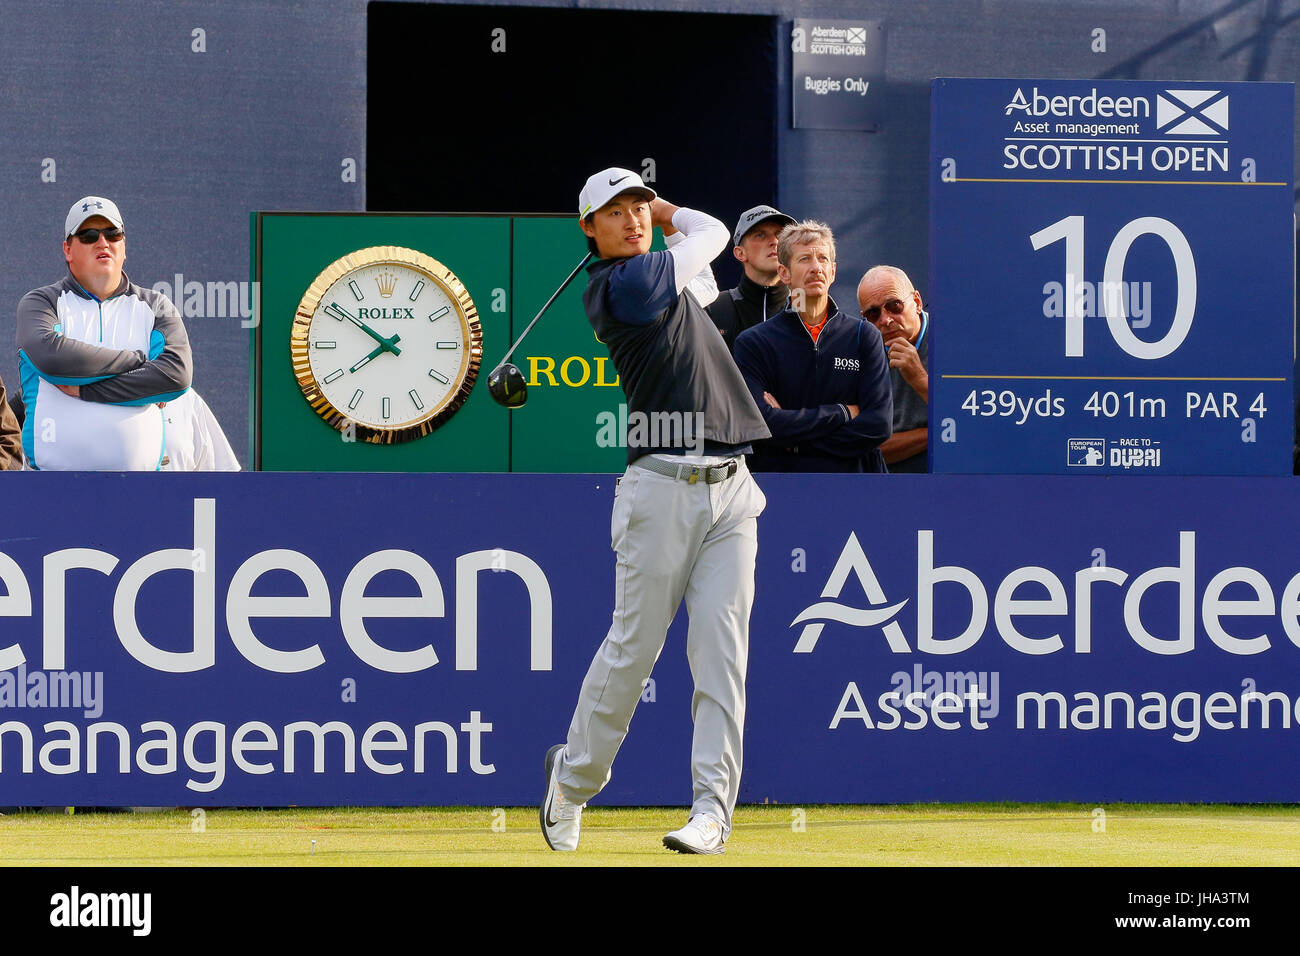 Ayrshire, Scotland, UK. 13th July, 2017. On the first day of the AAM Scottish Open Golf championship, golfers from around the world played over Dundonald Links near Irvine, Ayrshire. Players included Rory Mcilroy, Rickie Fowler, Jason Dufner, Henrik Stenson, Luke Donald and many others. Credit: Findlay/Alamy Live News Stock Photo